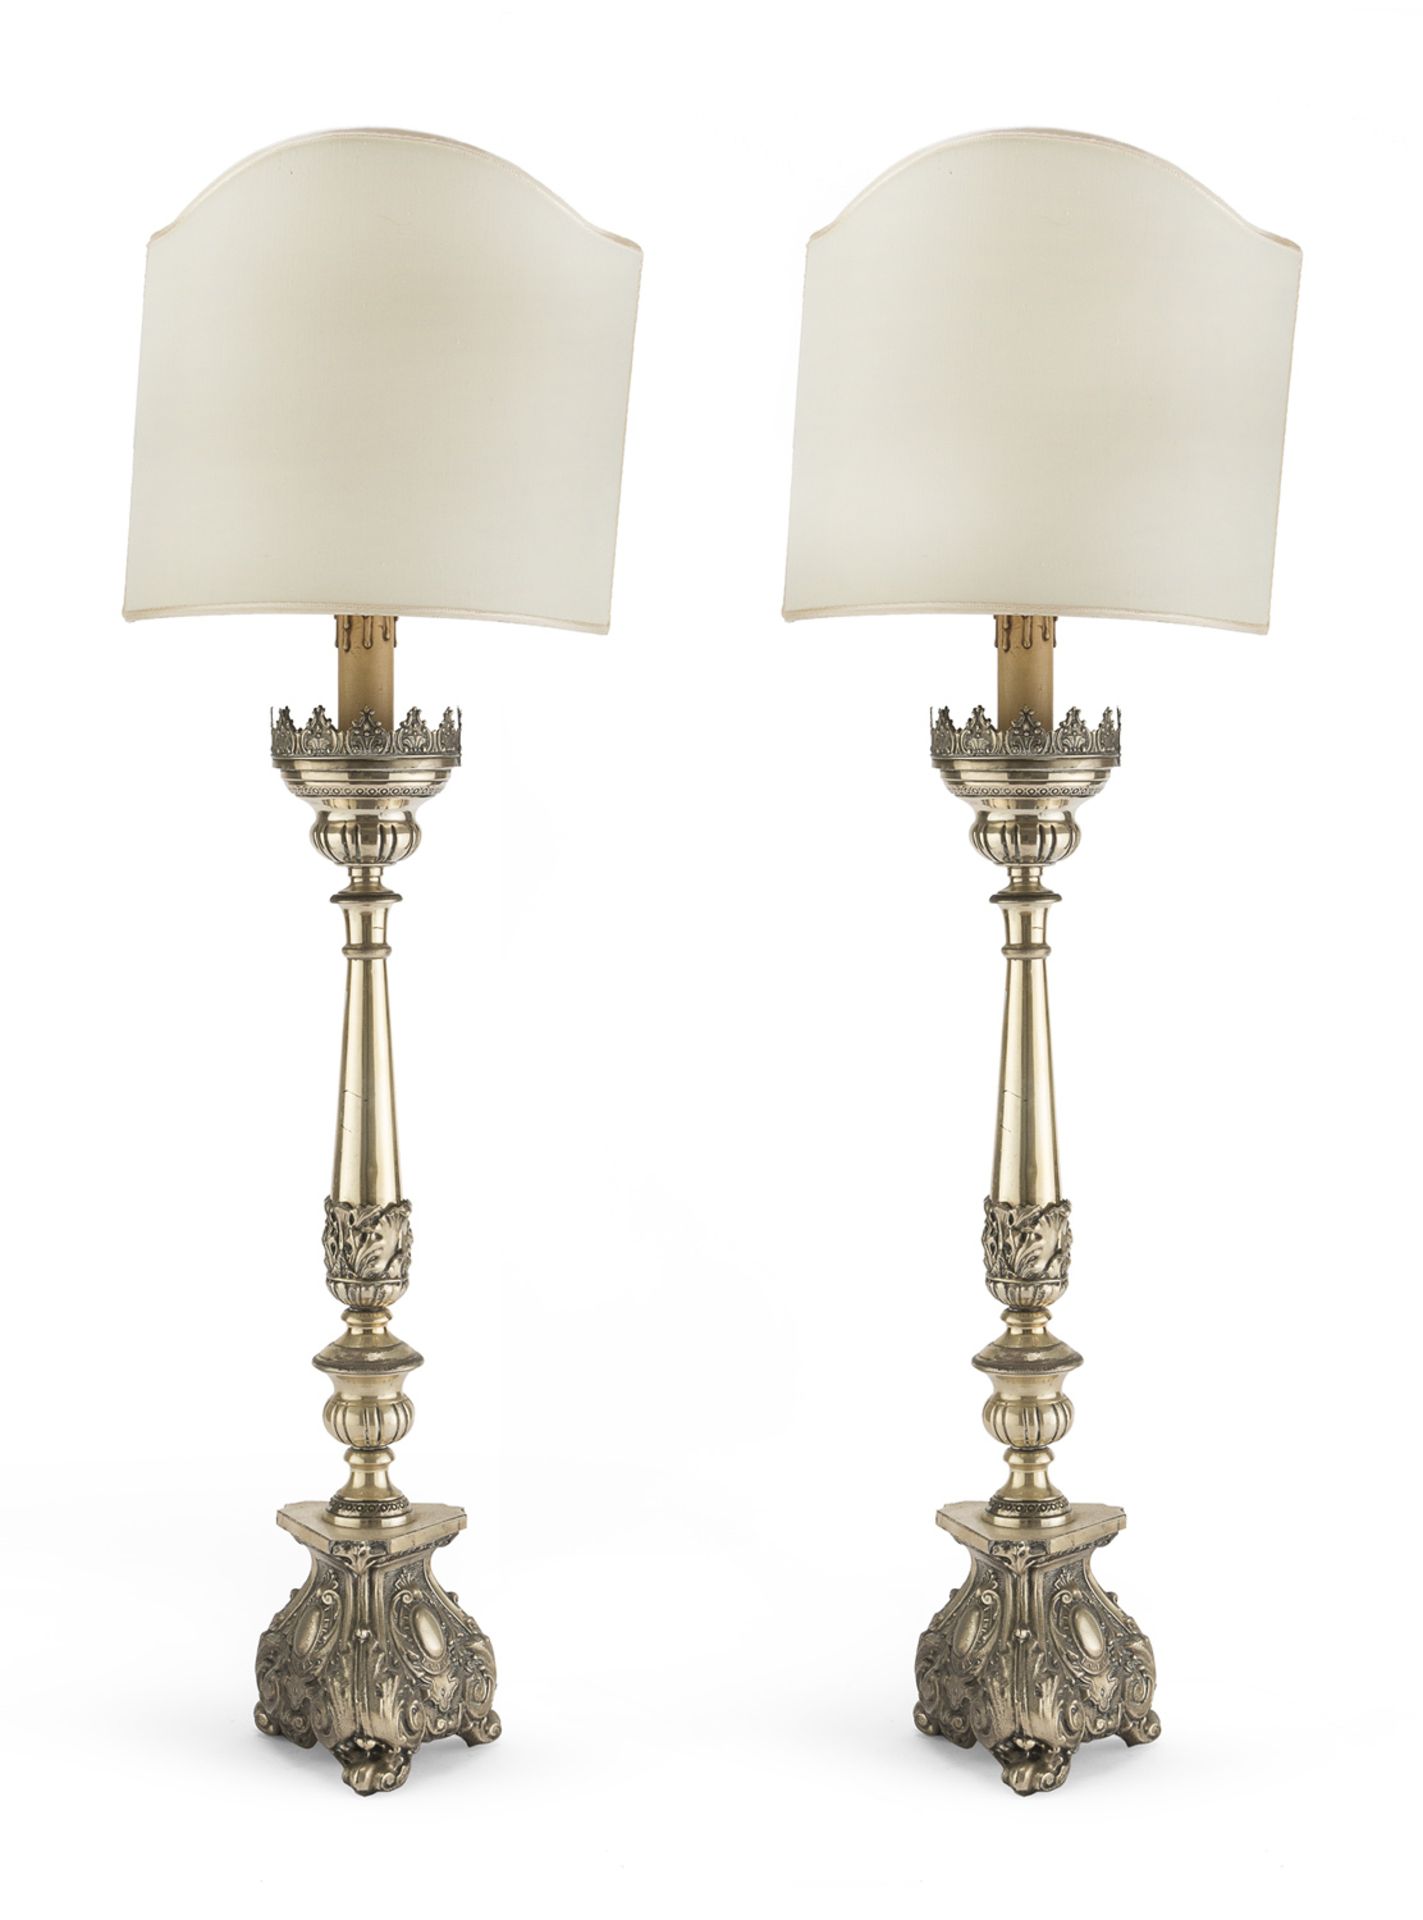 PAIR OF METAL CANDLESTICKS LATE 19TH CENTURY